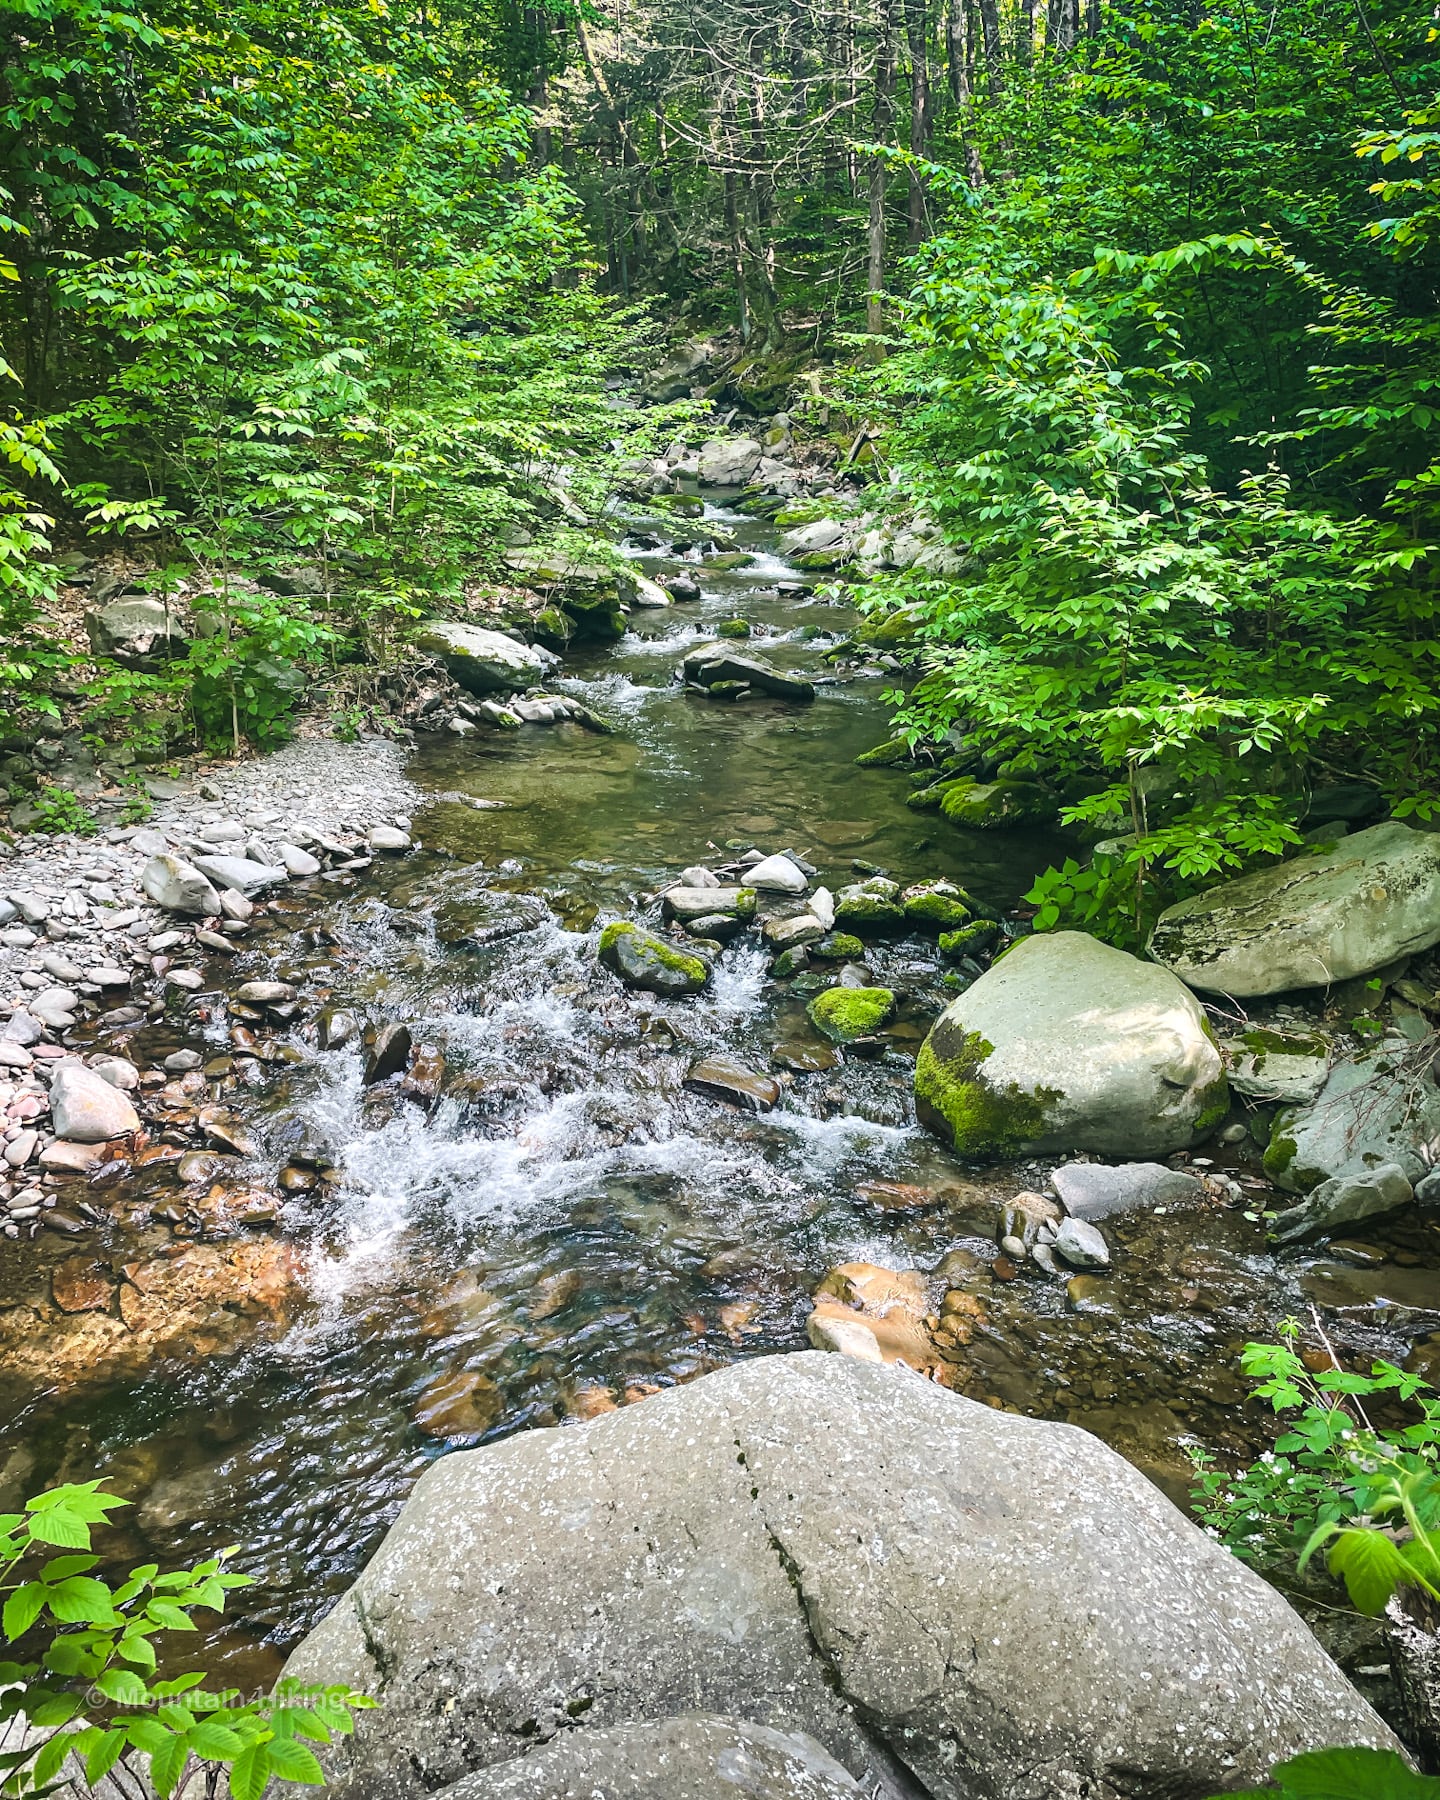 Kanape Brook on the way to Ashokan High Point and Mombaccus